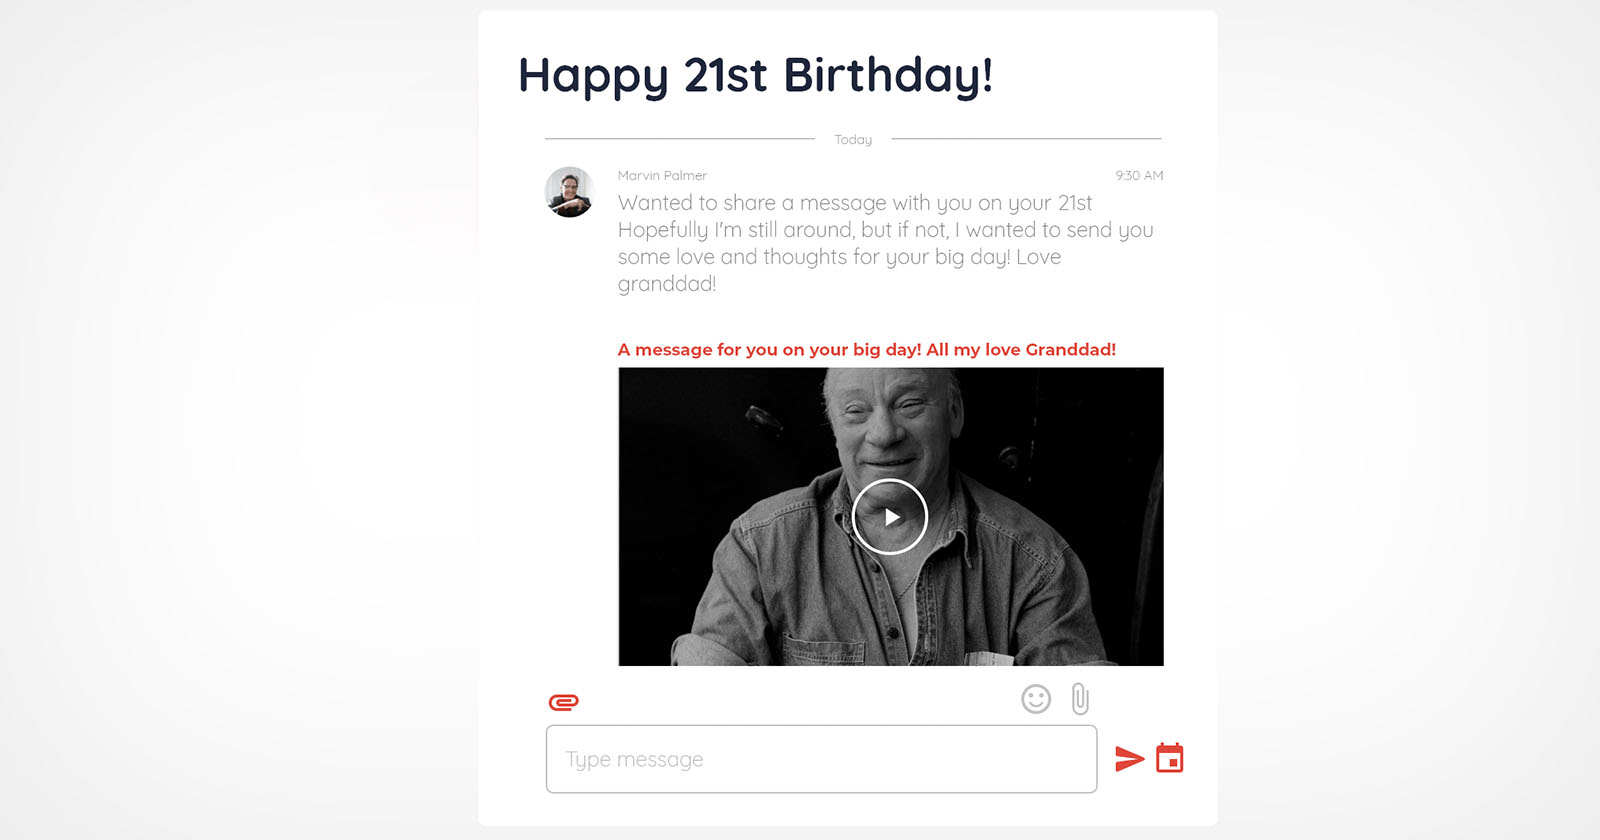 A birthday message with a video made in Inalife is shown.